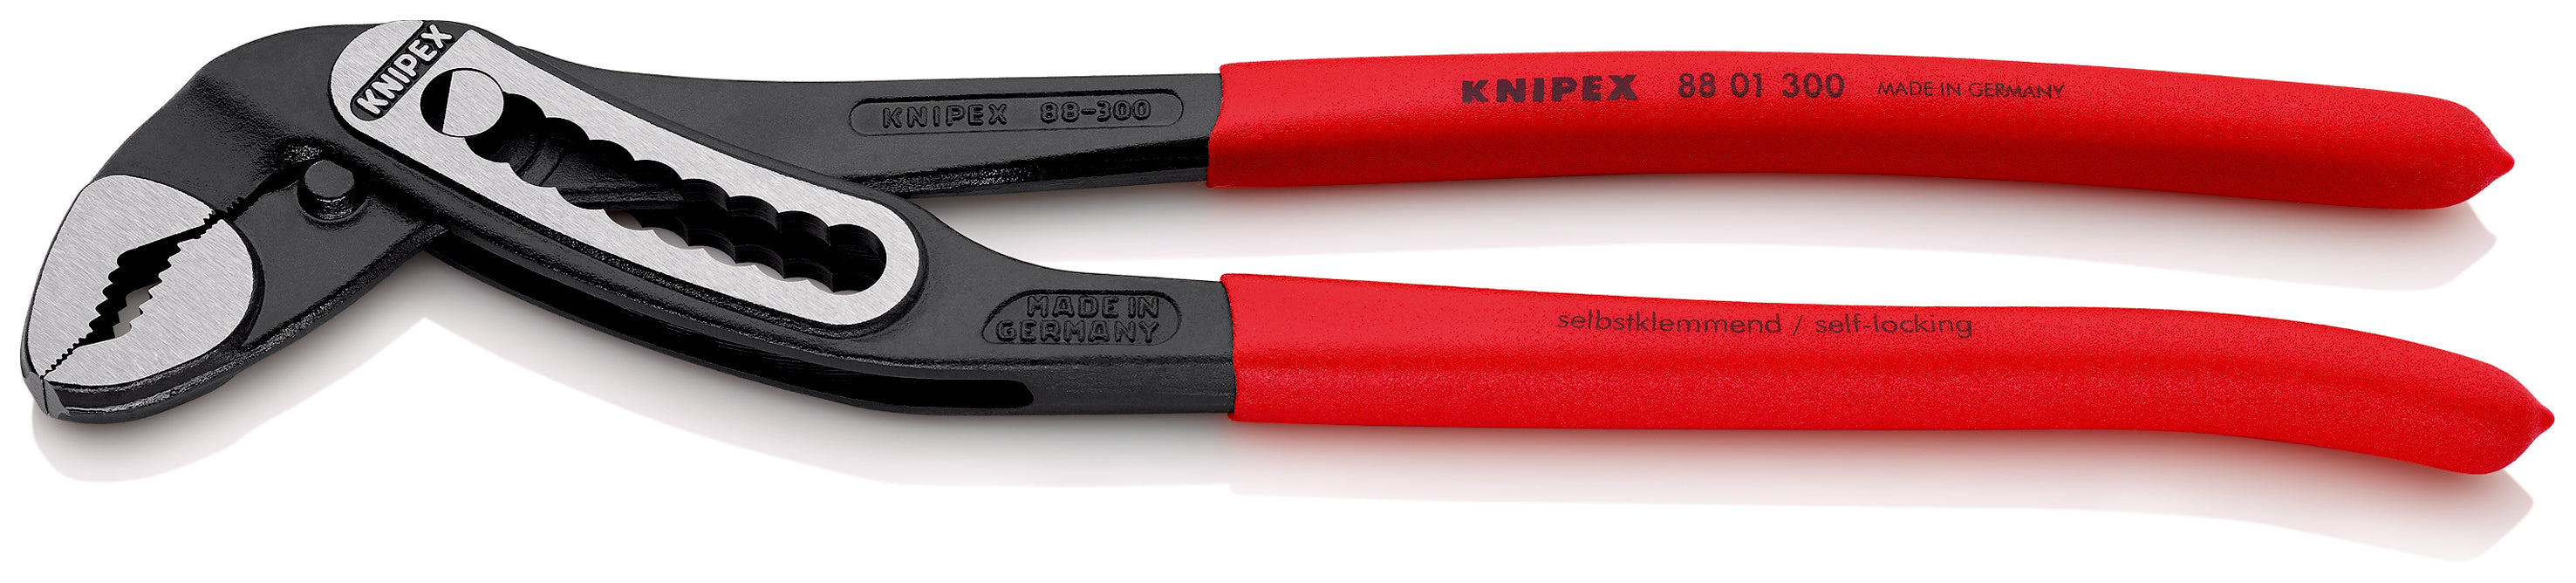  KNIPEX 55 00 300 Farriers' Pincers (Tear-Off Pliers for Vehicle  bodywork) Black atramentized 300 mm : Tools & Home Improvement